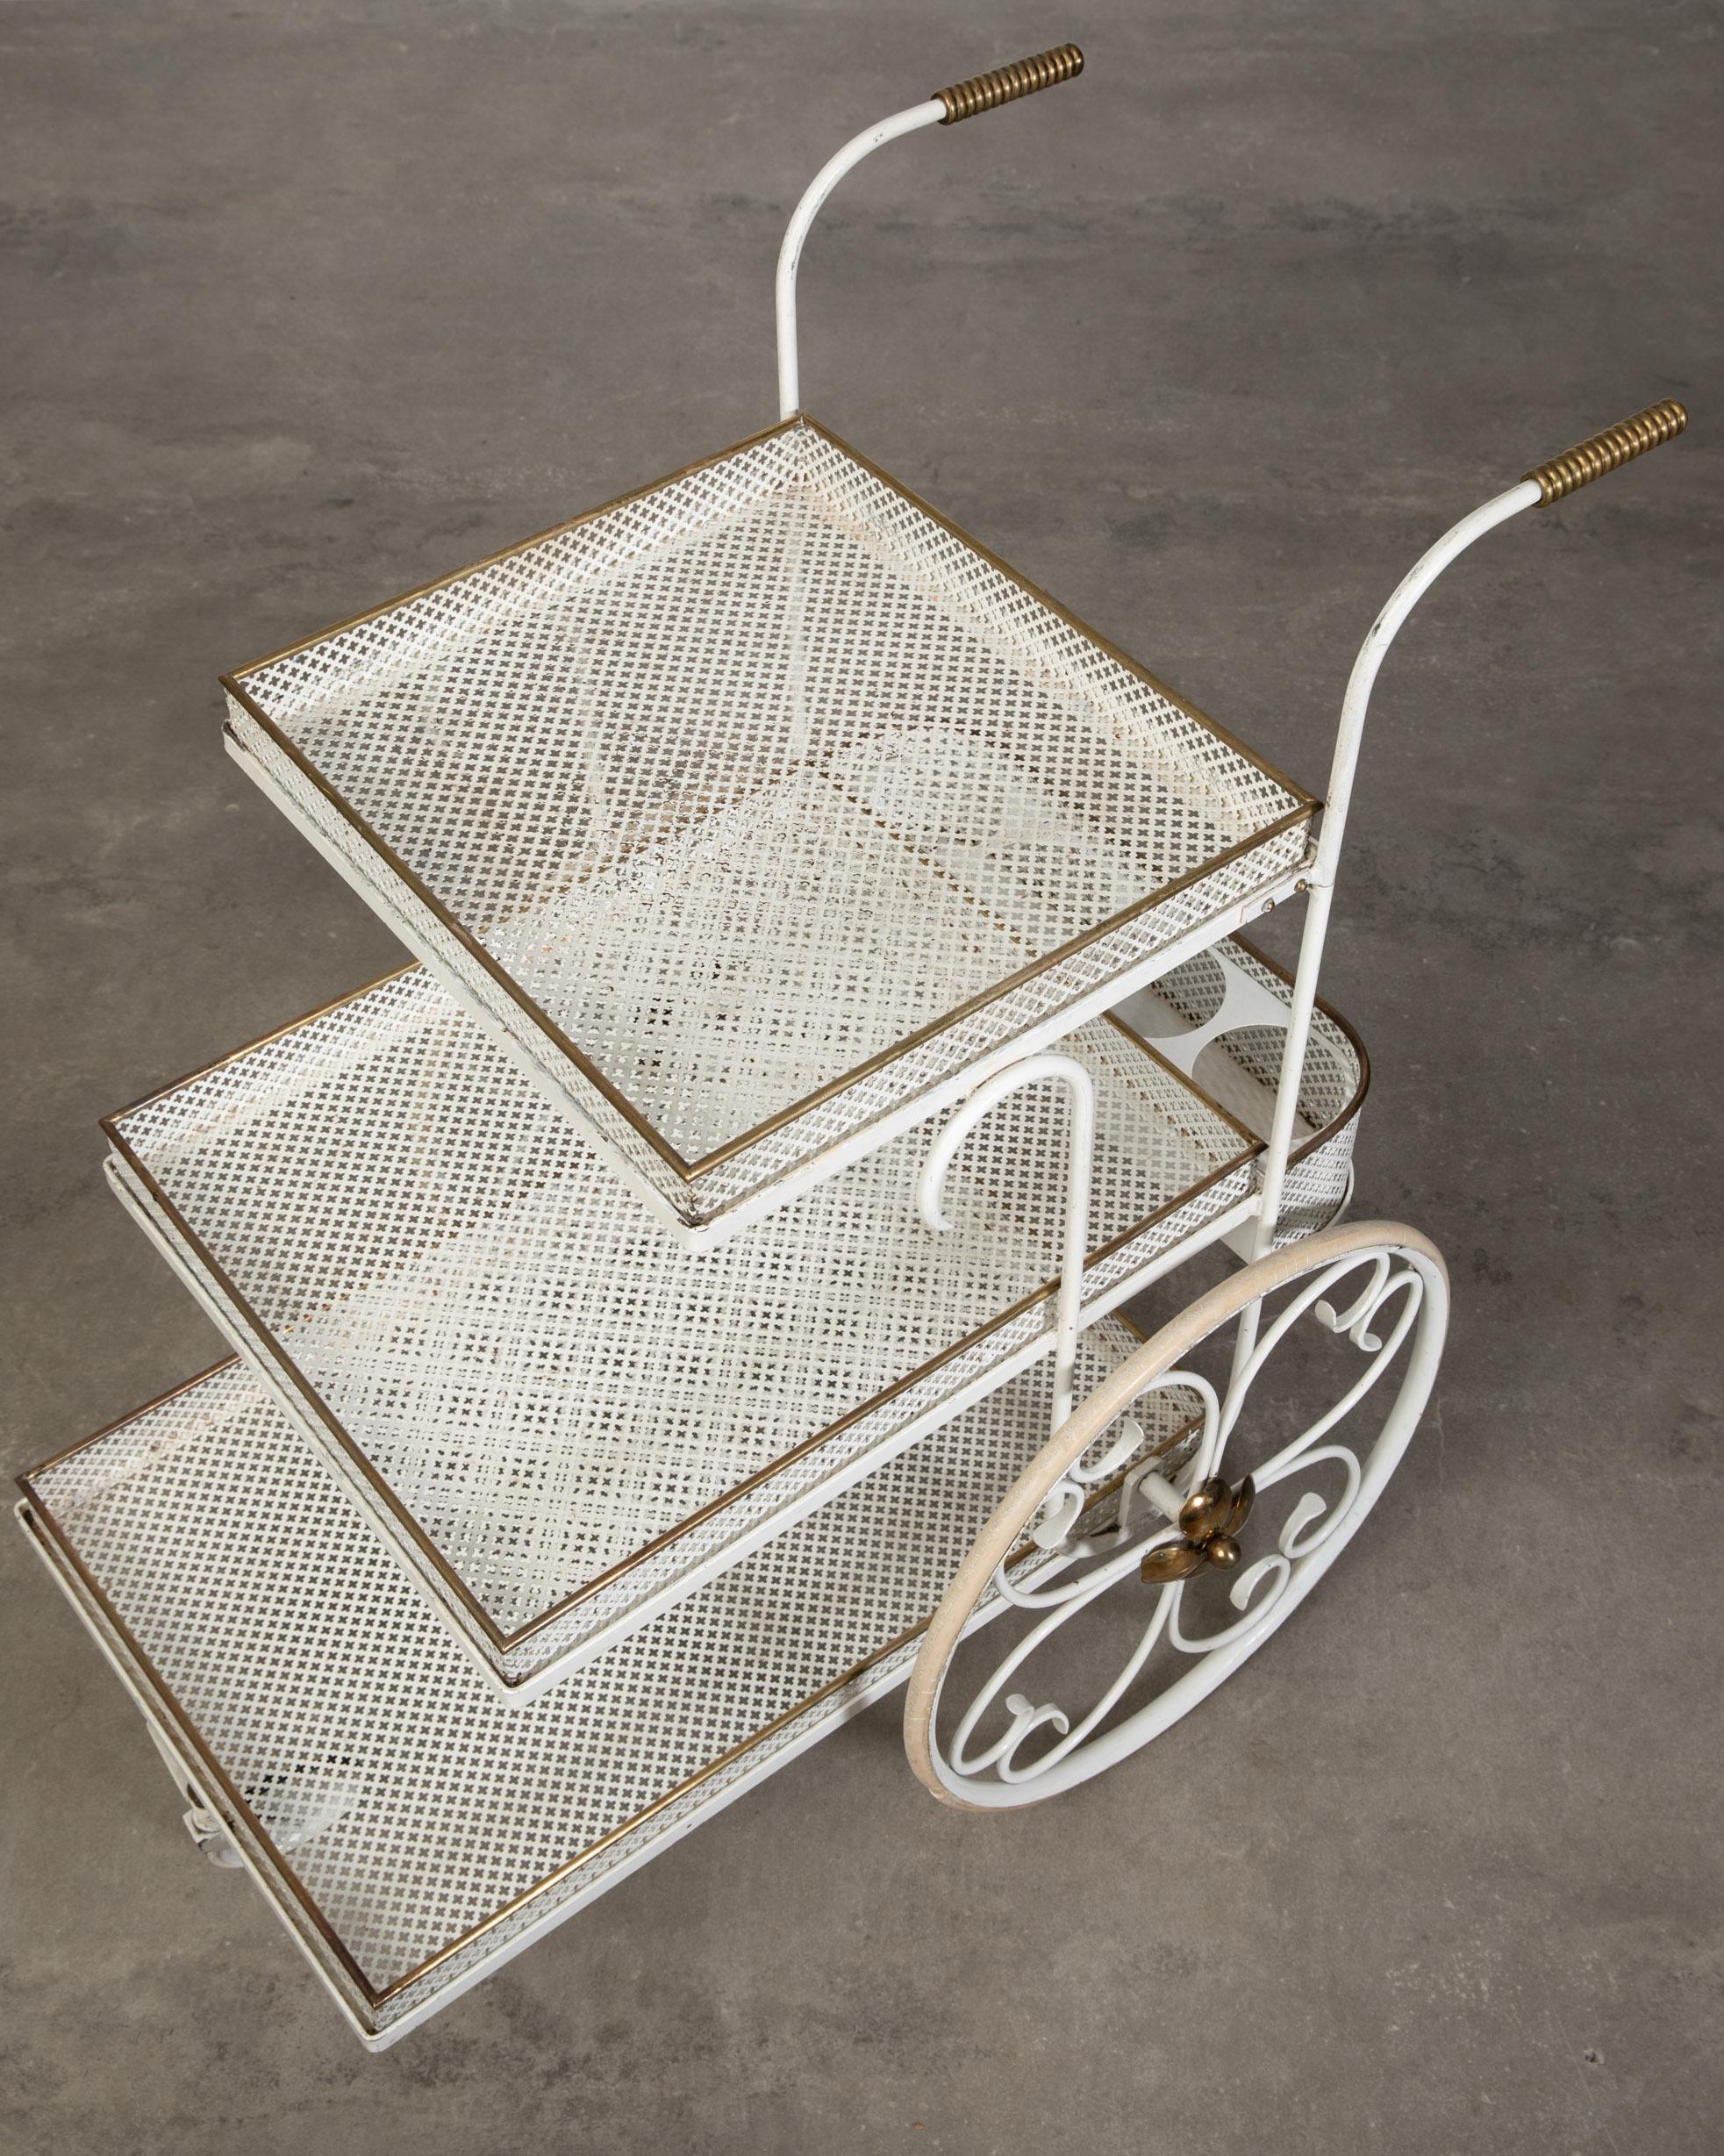 Mid-Century Modern vintage serving and bar cart attributed to Svenskt Tenn and Josef Frank. Late 30´s and made of metal and brass. Three perforated white metal trays that can be lifted out when serving. Beautiful brass details.

Architect,